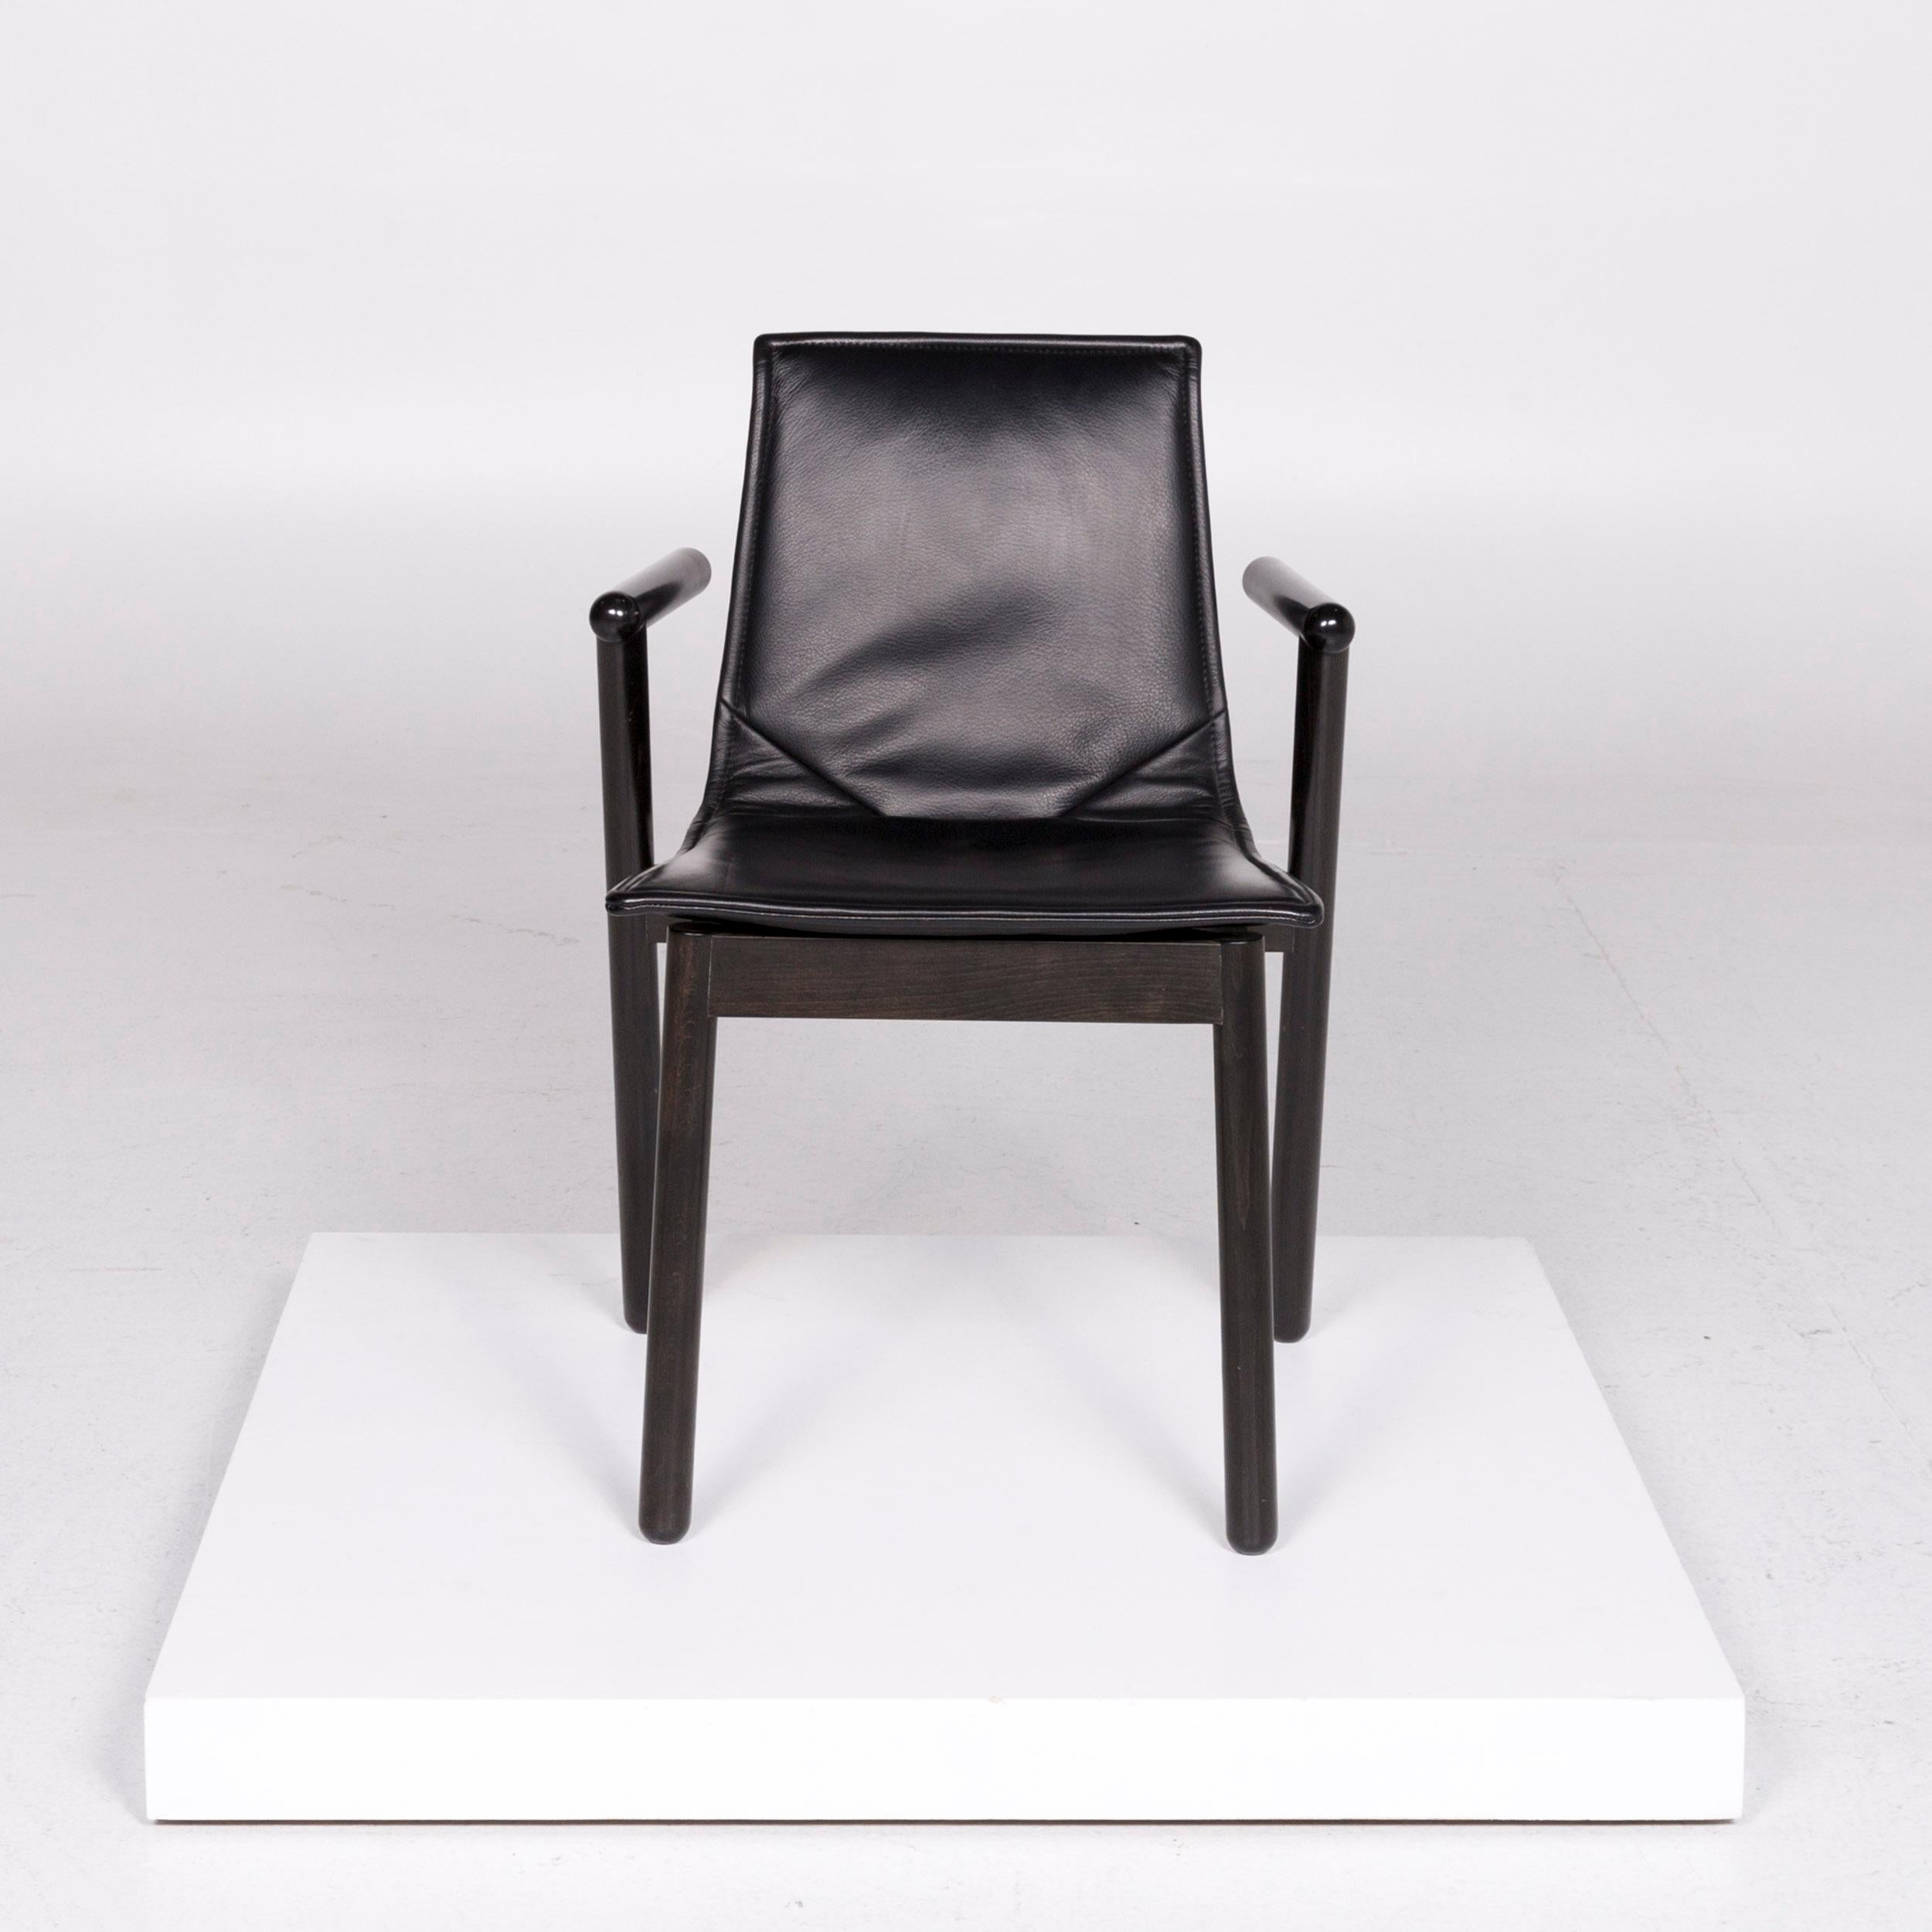 We bring to you a Cassina leather armchair black chair diner dining chair.
 
 Product measurements in centimeters:
 
Depth 53
Width 52
Height 77
Seat-height 46
Rest-height 62
Seat-depth 38
Seat-width 44
Back-height 33.
 